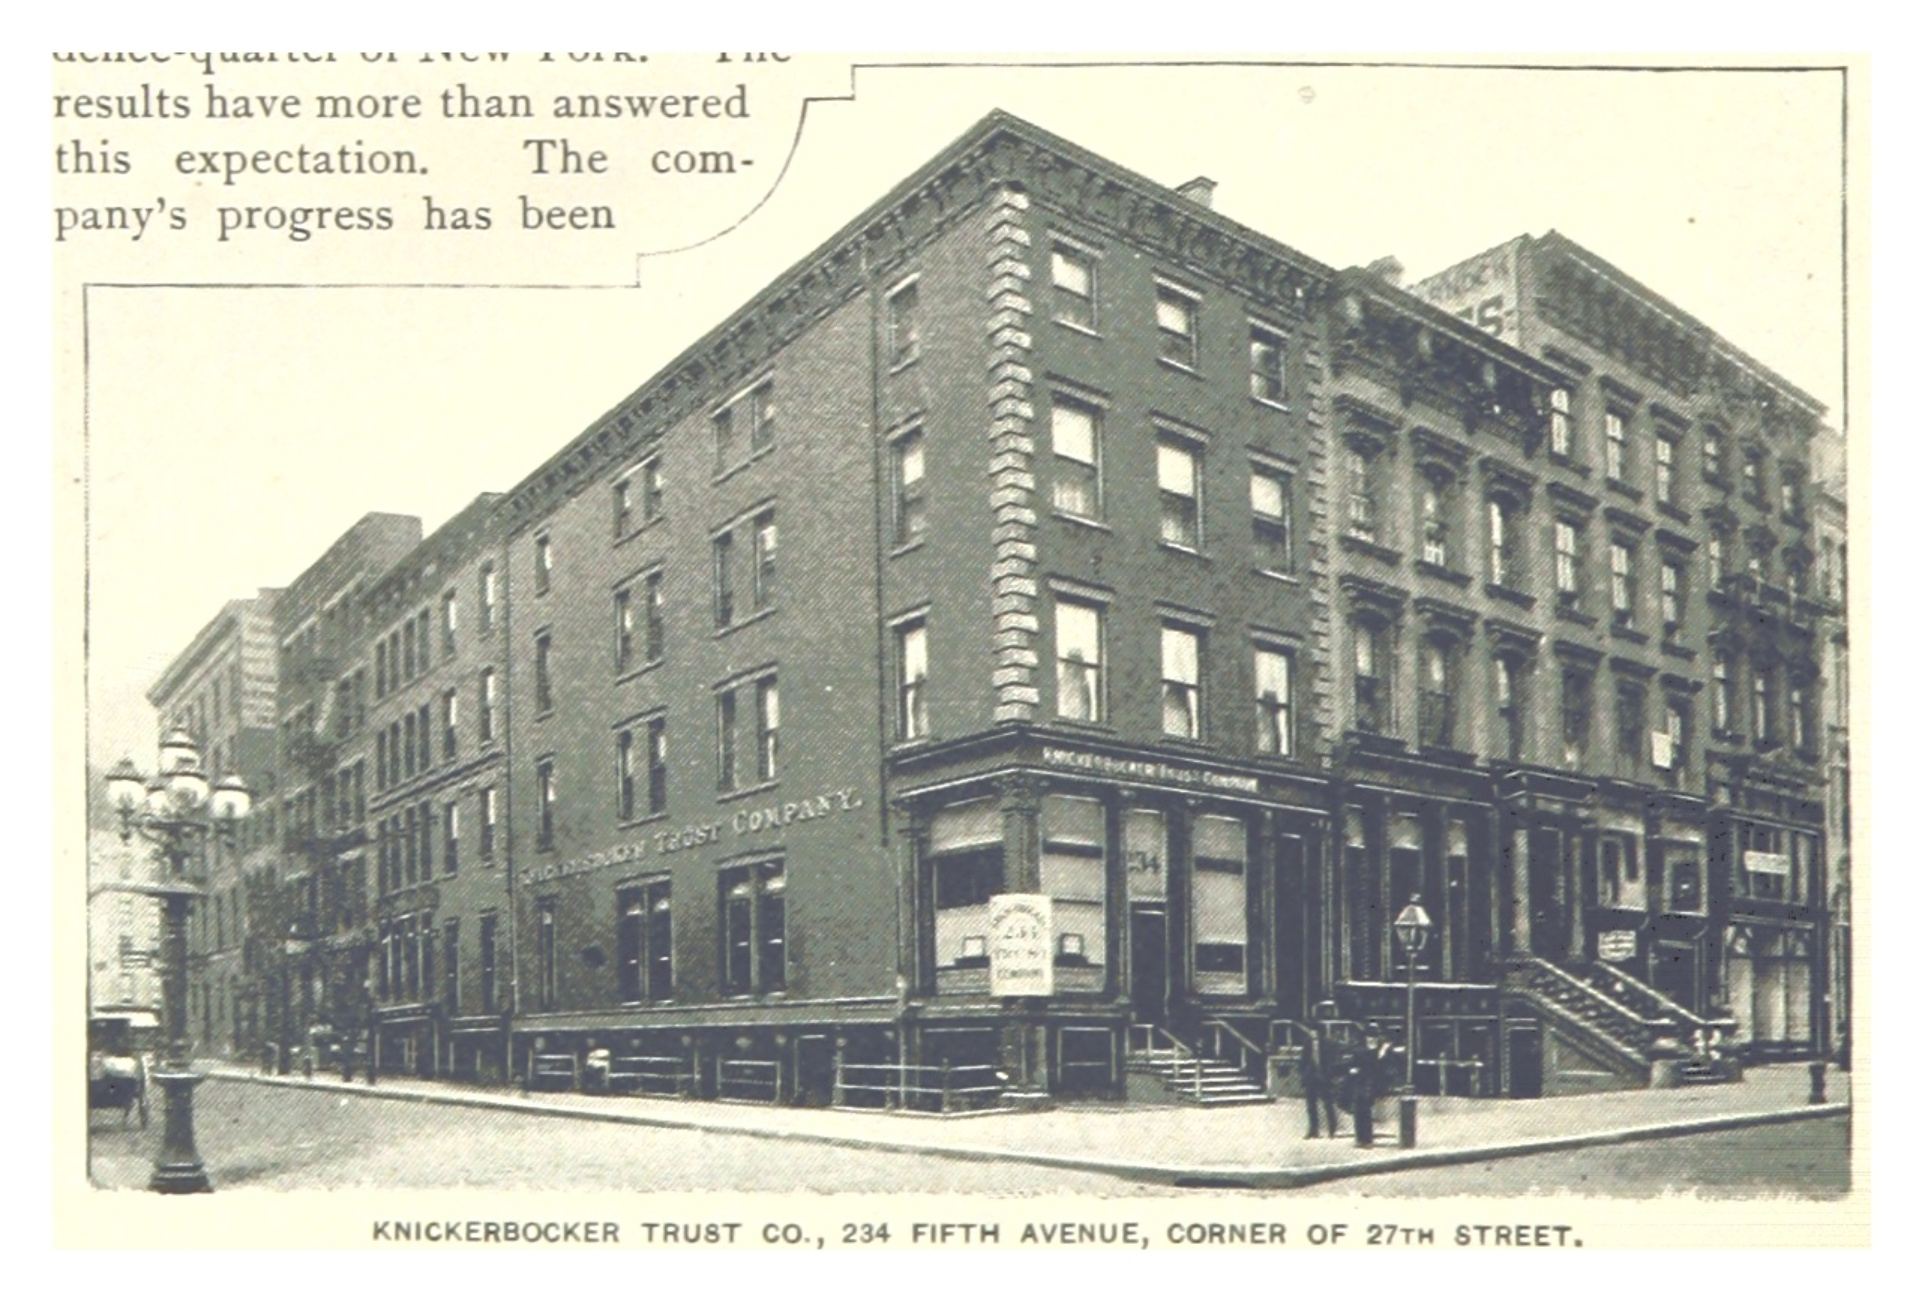 The Knickerbocker Trust Co., located at Fifth Avenue and 27th Street, the intersection where Arnold was last reported seen